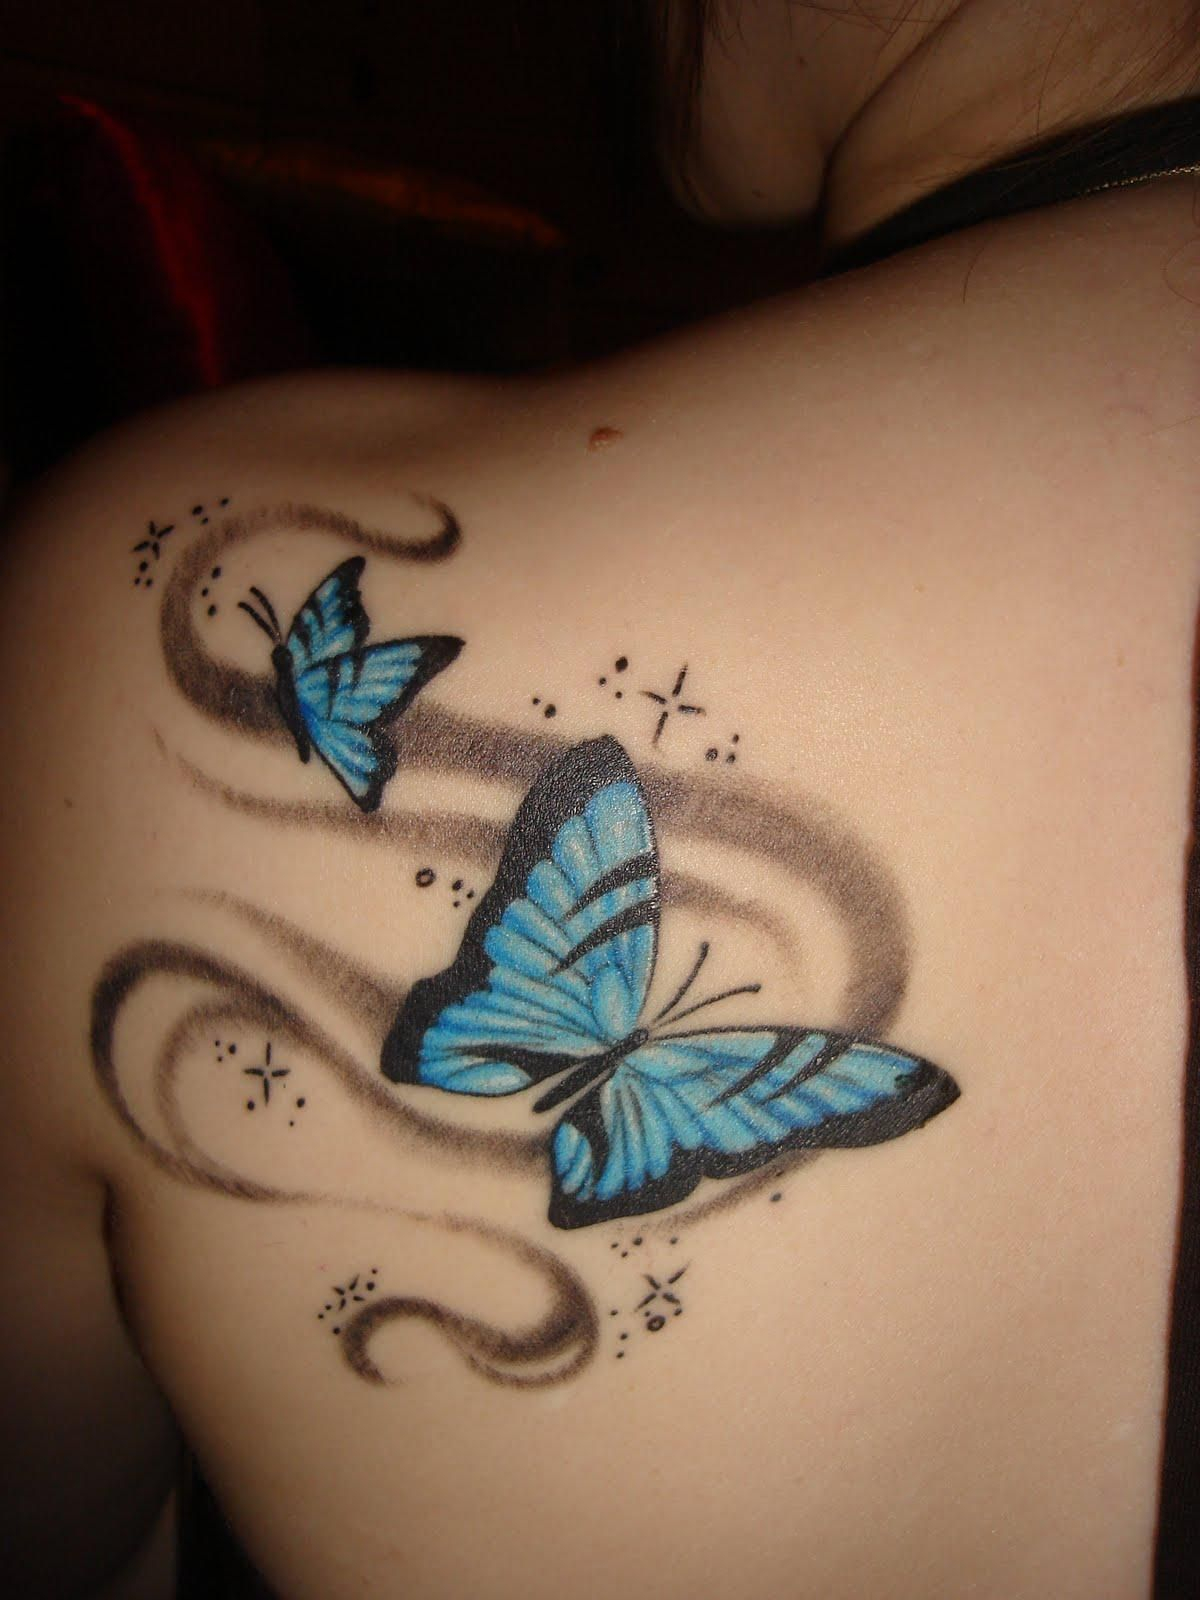 Shoulder Blade Tattoos For Women Pictures Parents Permission 24 within size 1200 X 1600